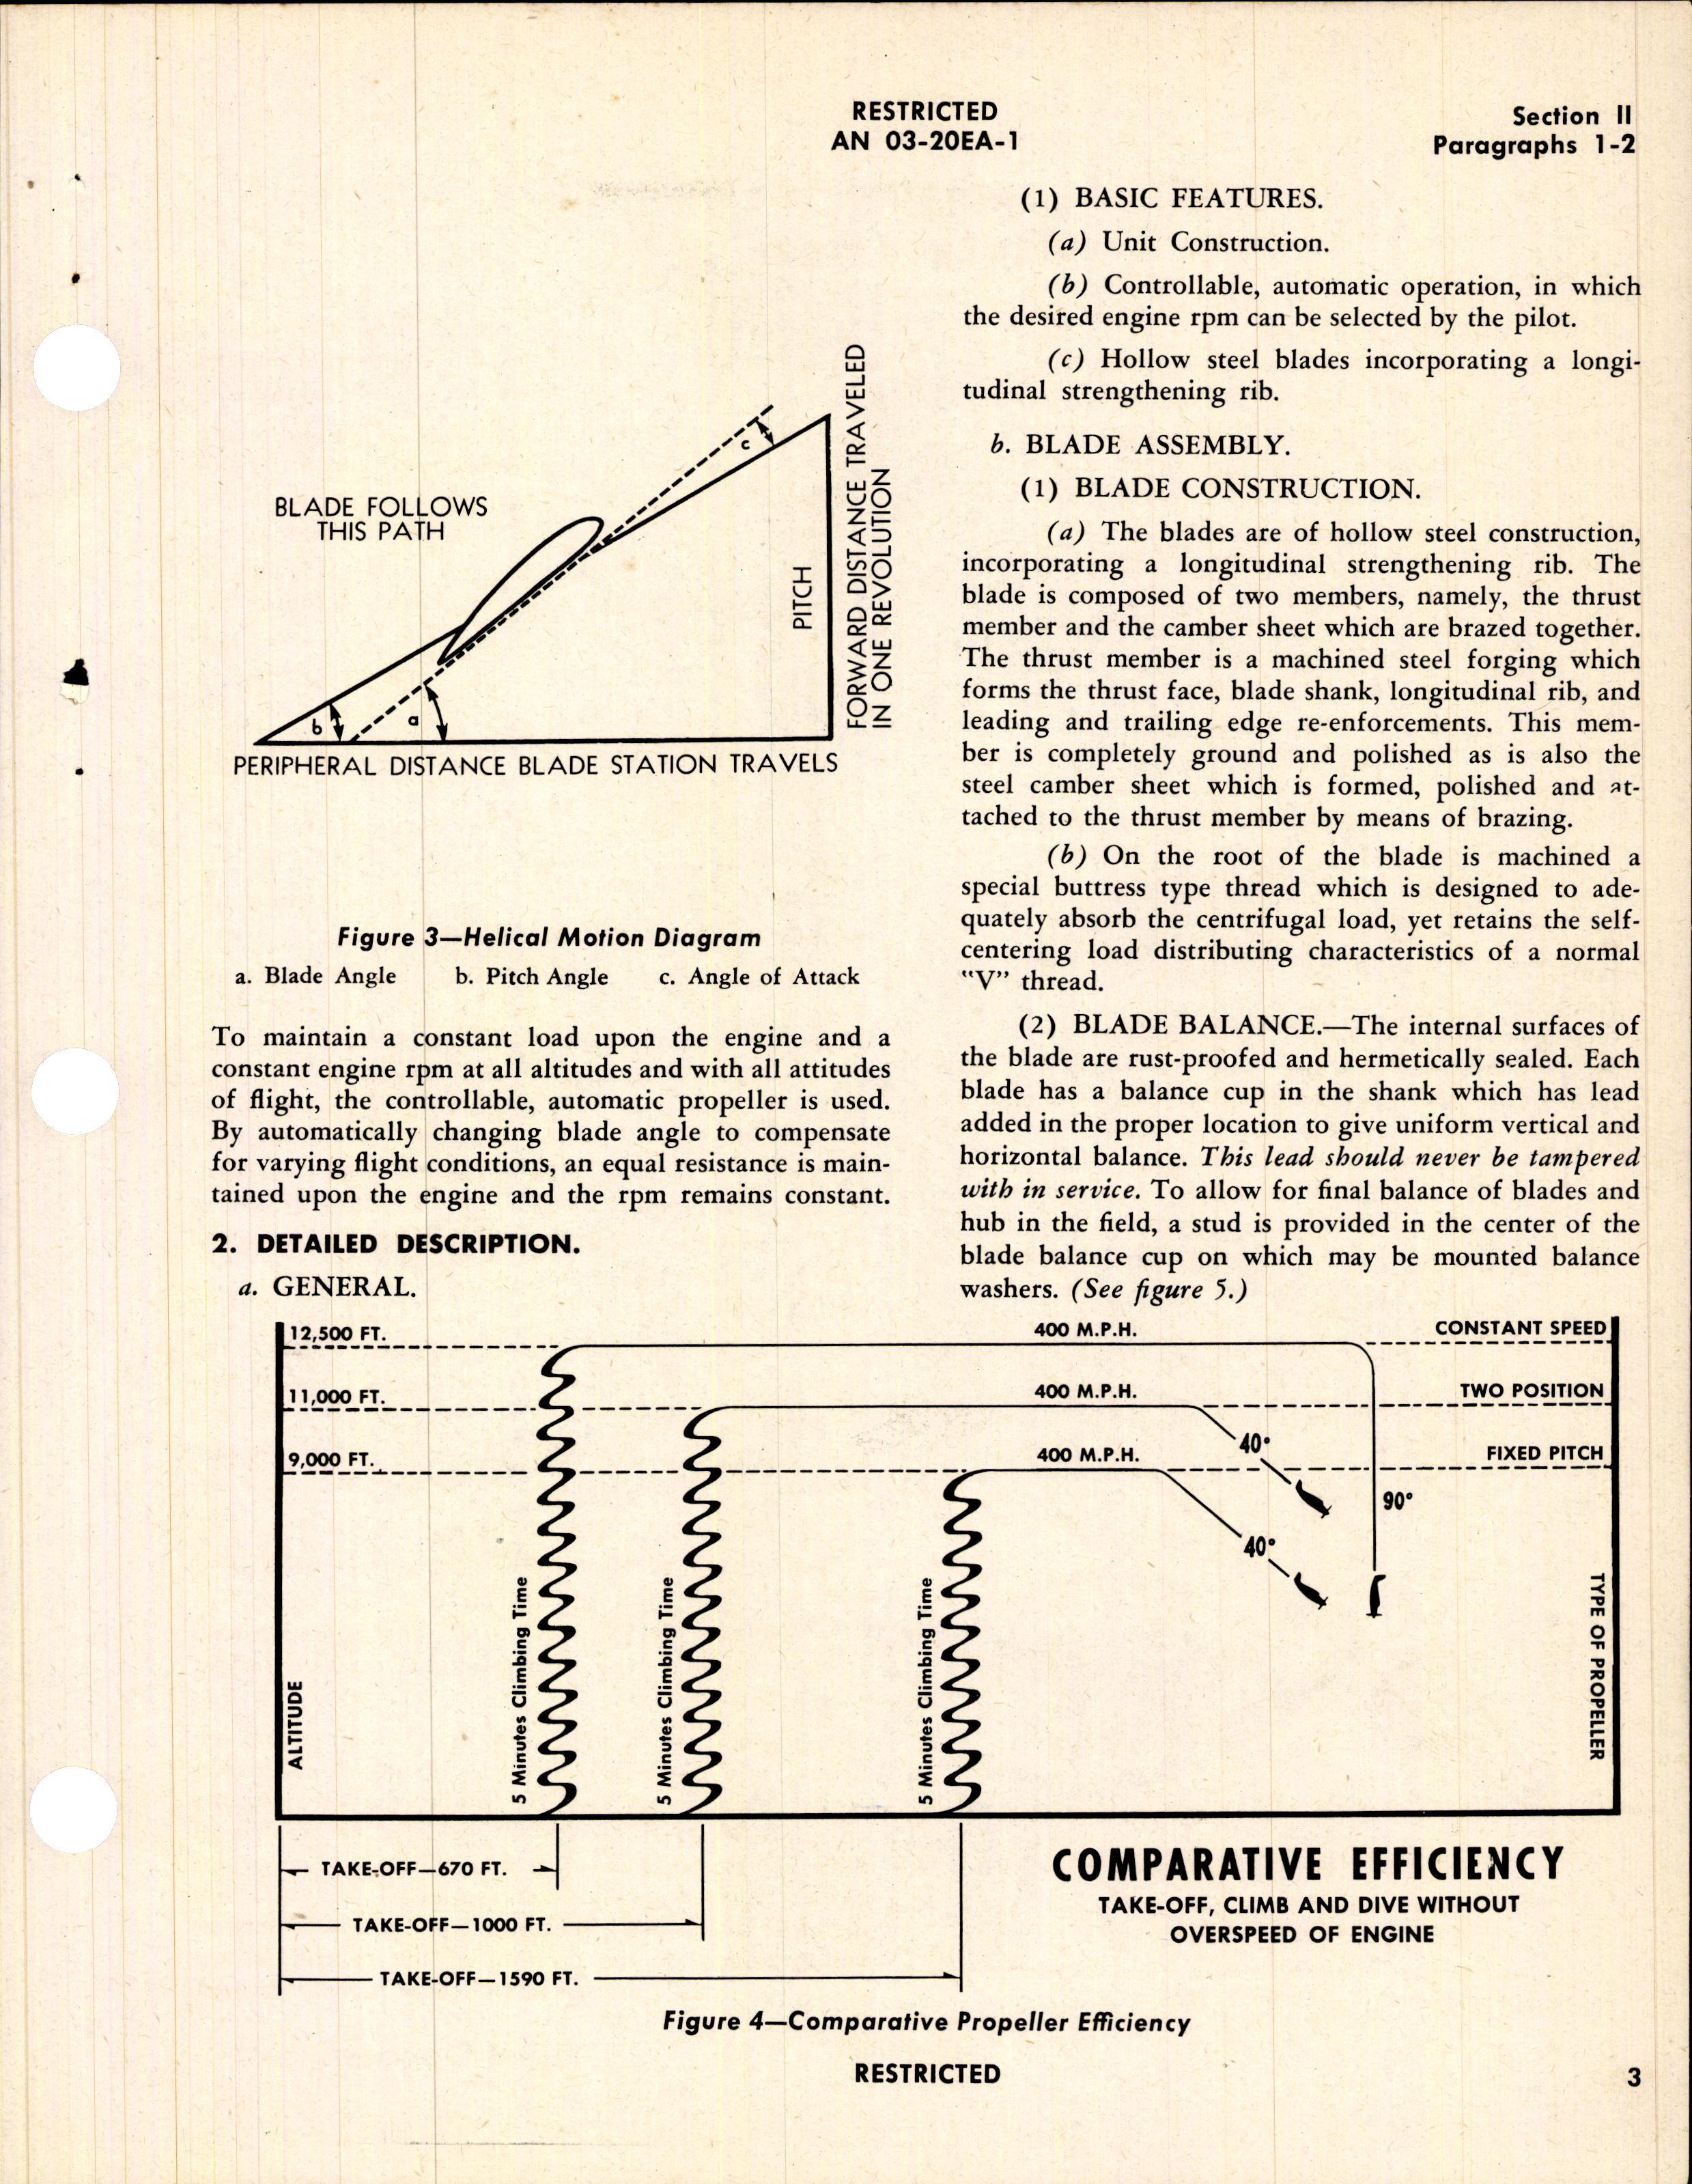 Sample page 9 from AirCorps Library document: Operation, Service, & Overhaul Instructions with Parts Catalog for Constant Speed Propeller